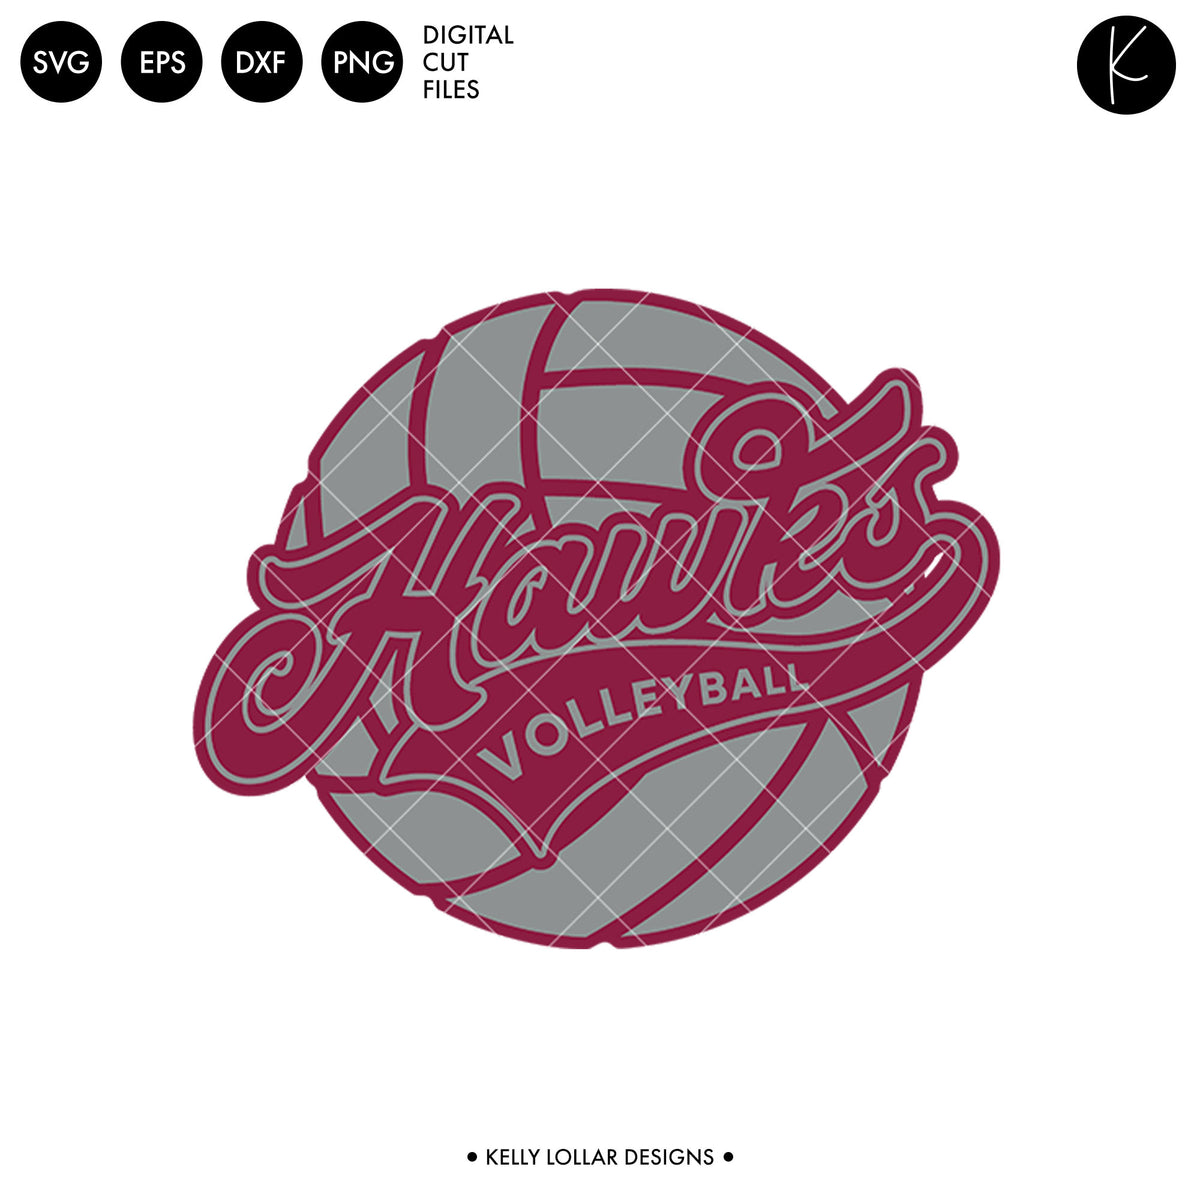 Hawks Volleyball Bundle | SVG DXF EPS PNG Cut Files